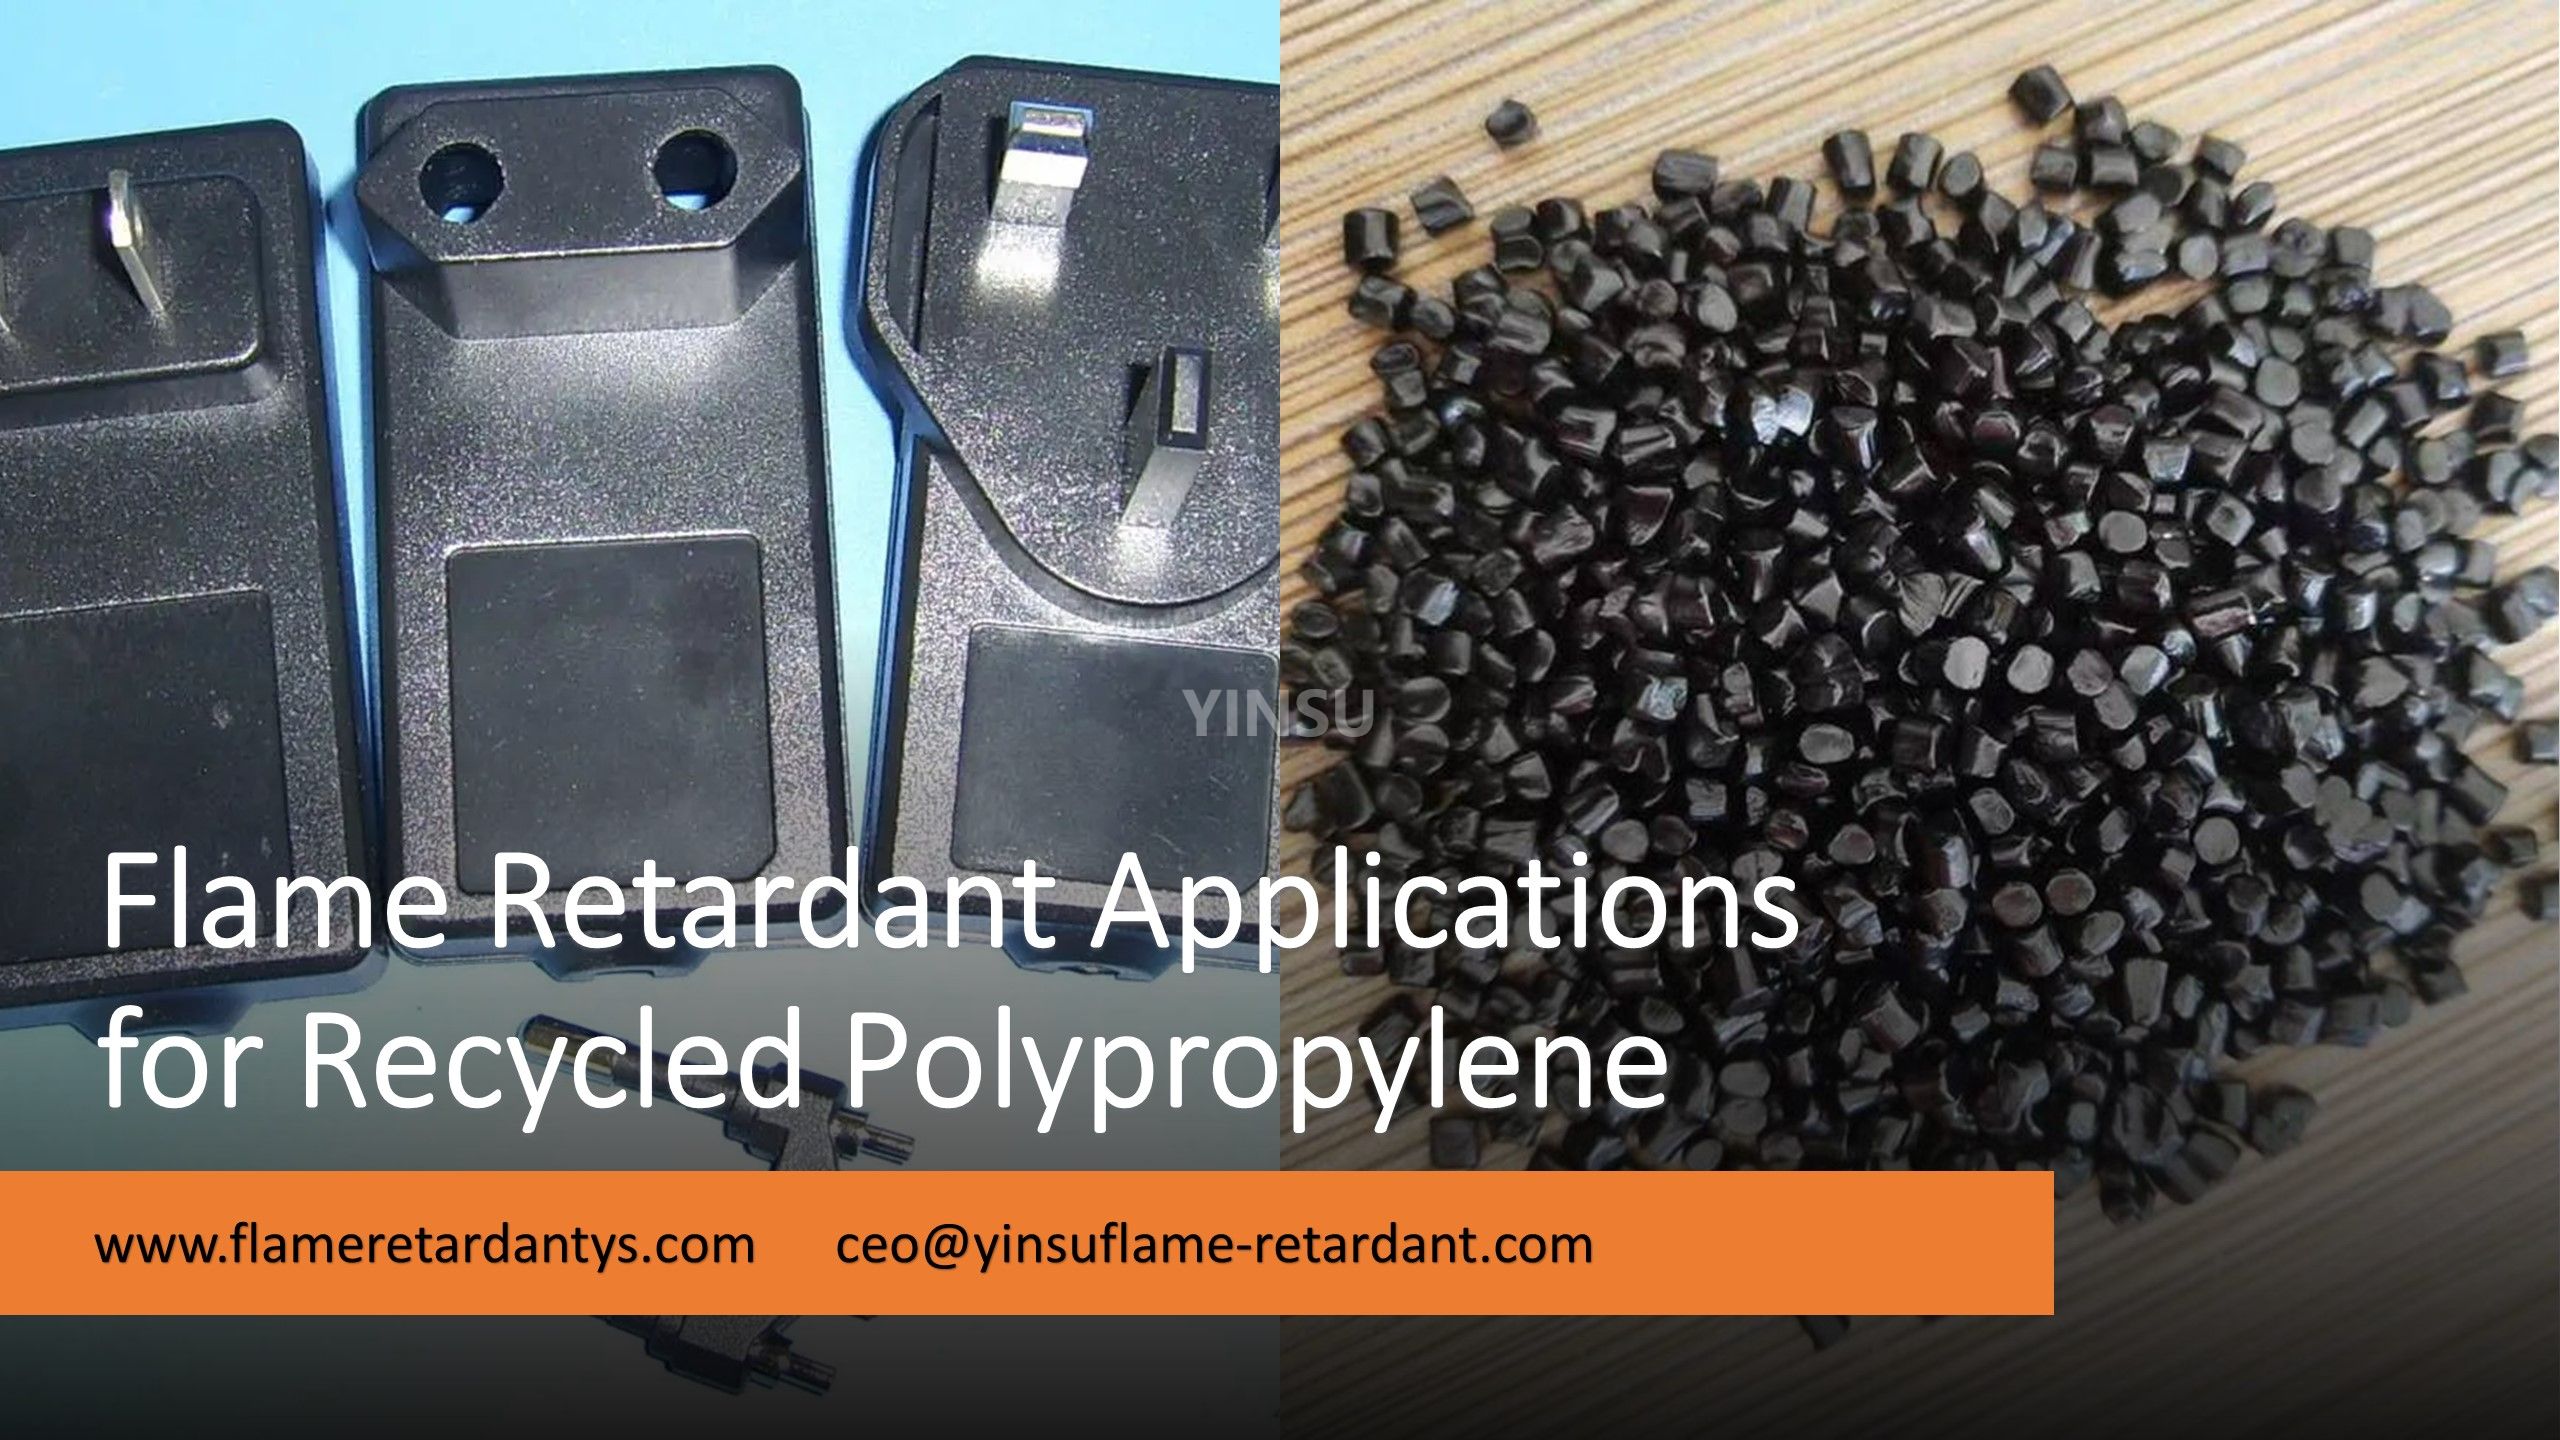 Flame Retardant Applications for Recycled Polypropylene